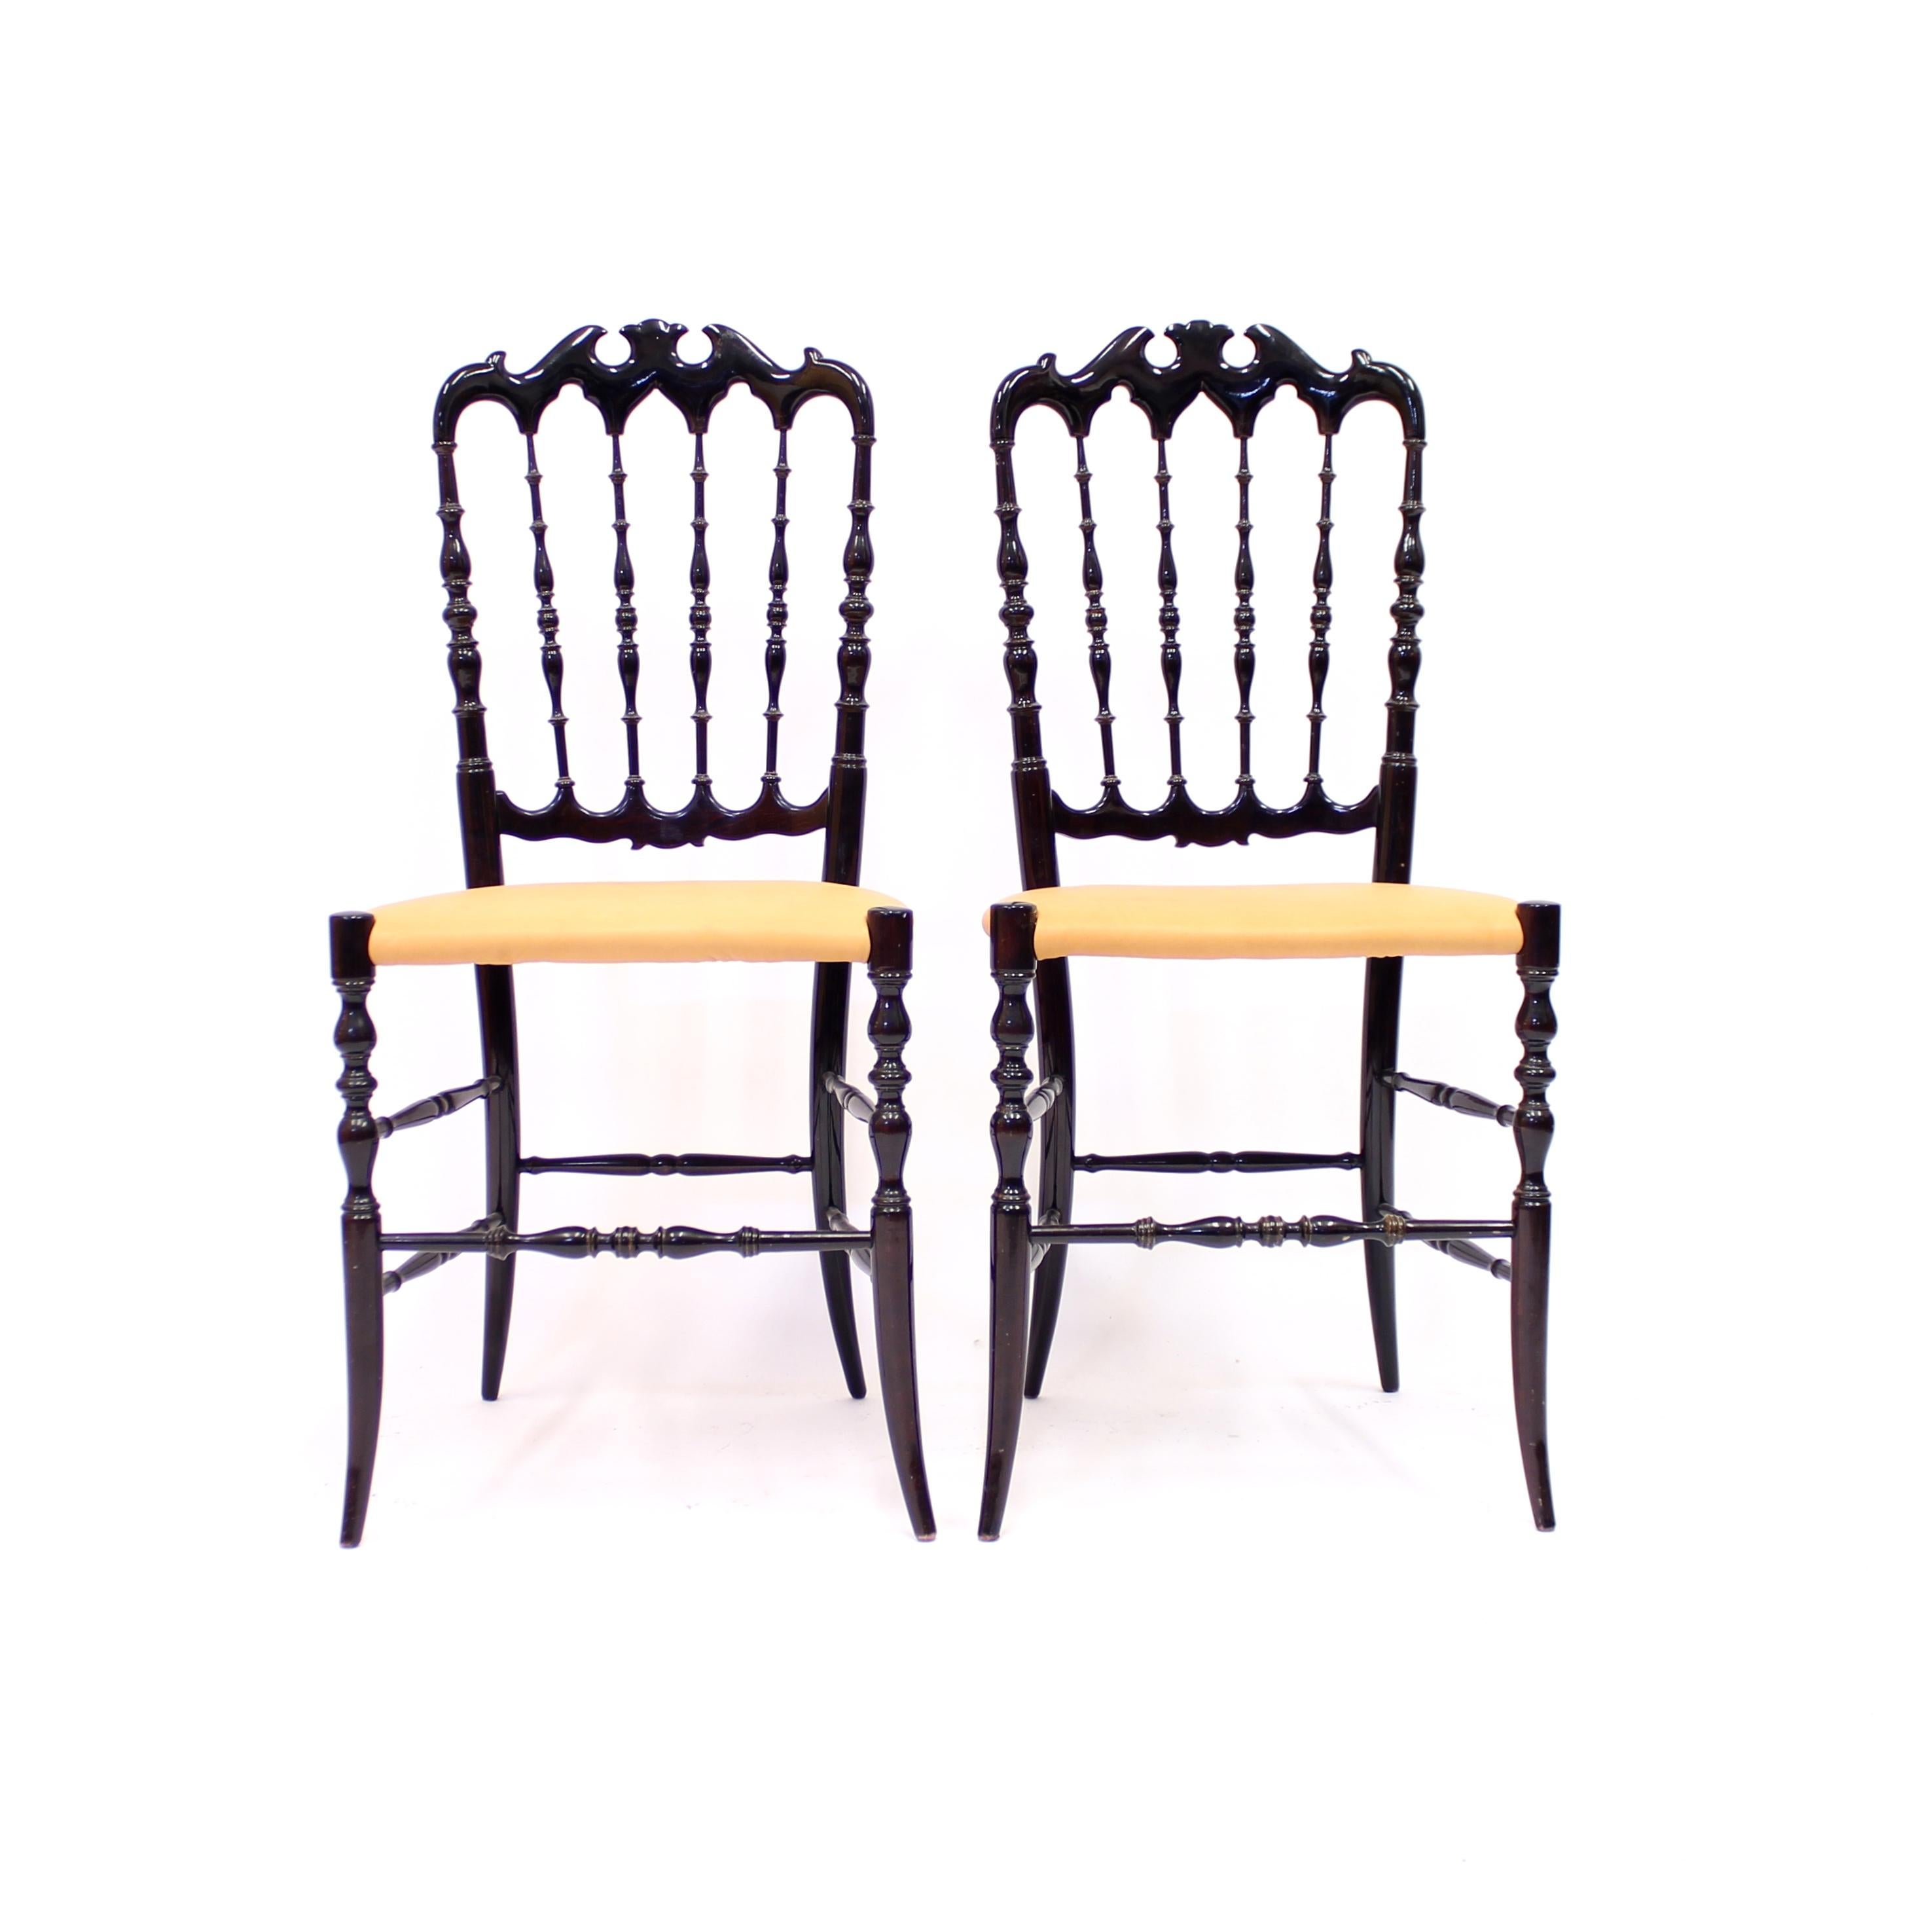 Pair of stained dark brown (almost black) vintage Chiavari chairs with newly upholstered leather seats, circa 1950. Most of the frame has lathed details. Newly upholstered in vintage leather so will have some nice light patina. Good vintage